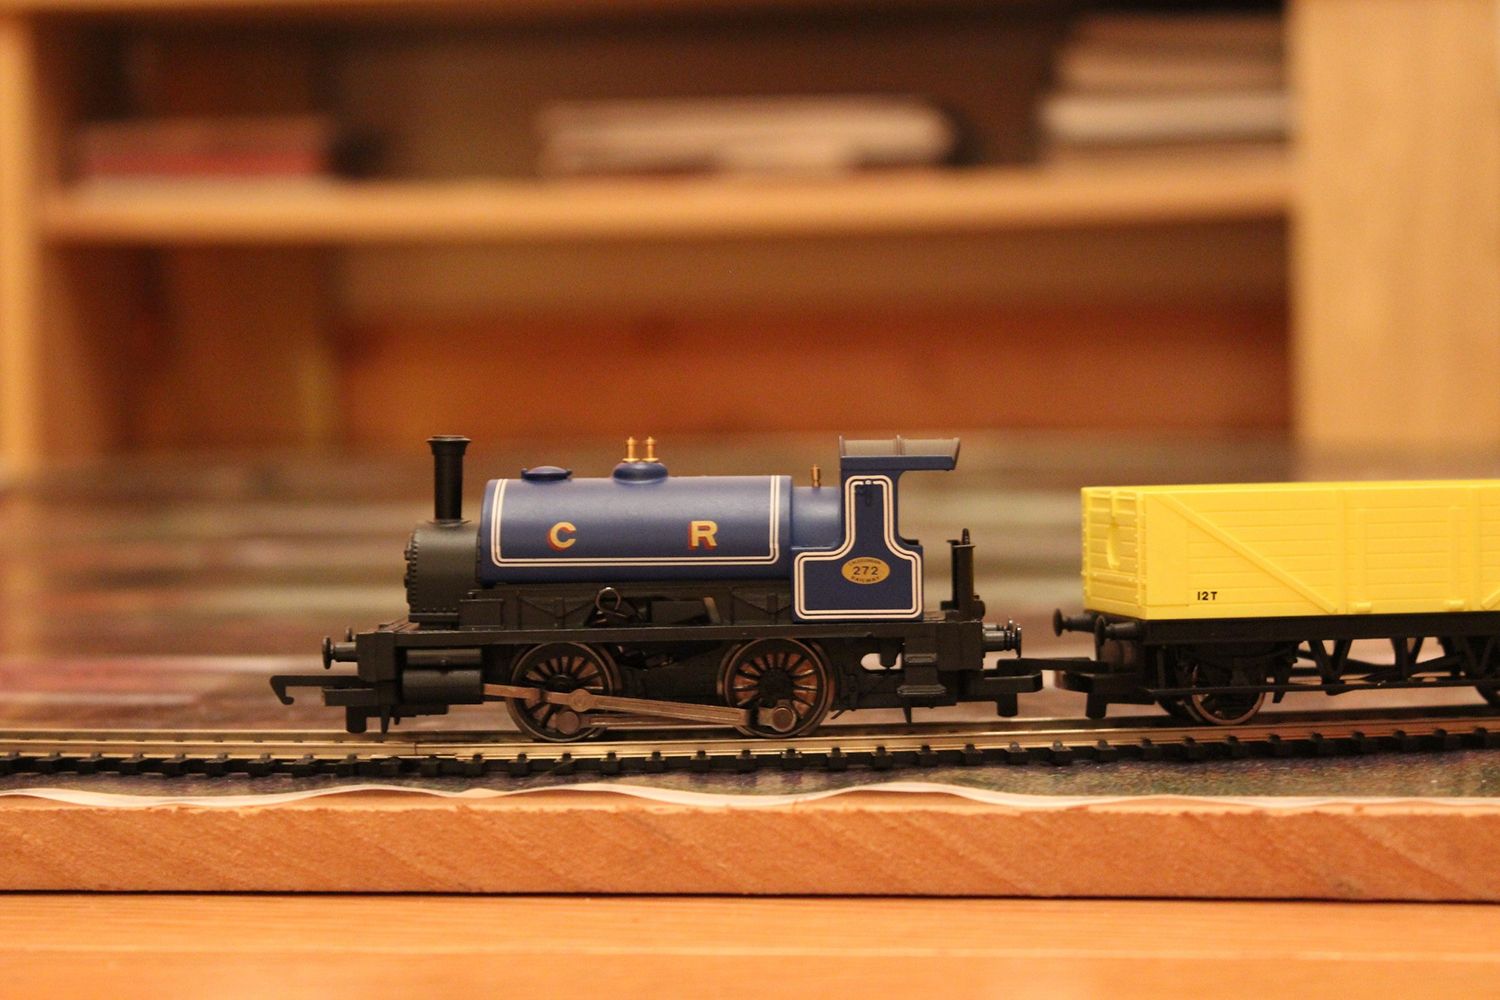 A Hornby model railway locomotive running on some track